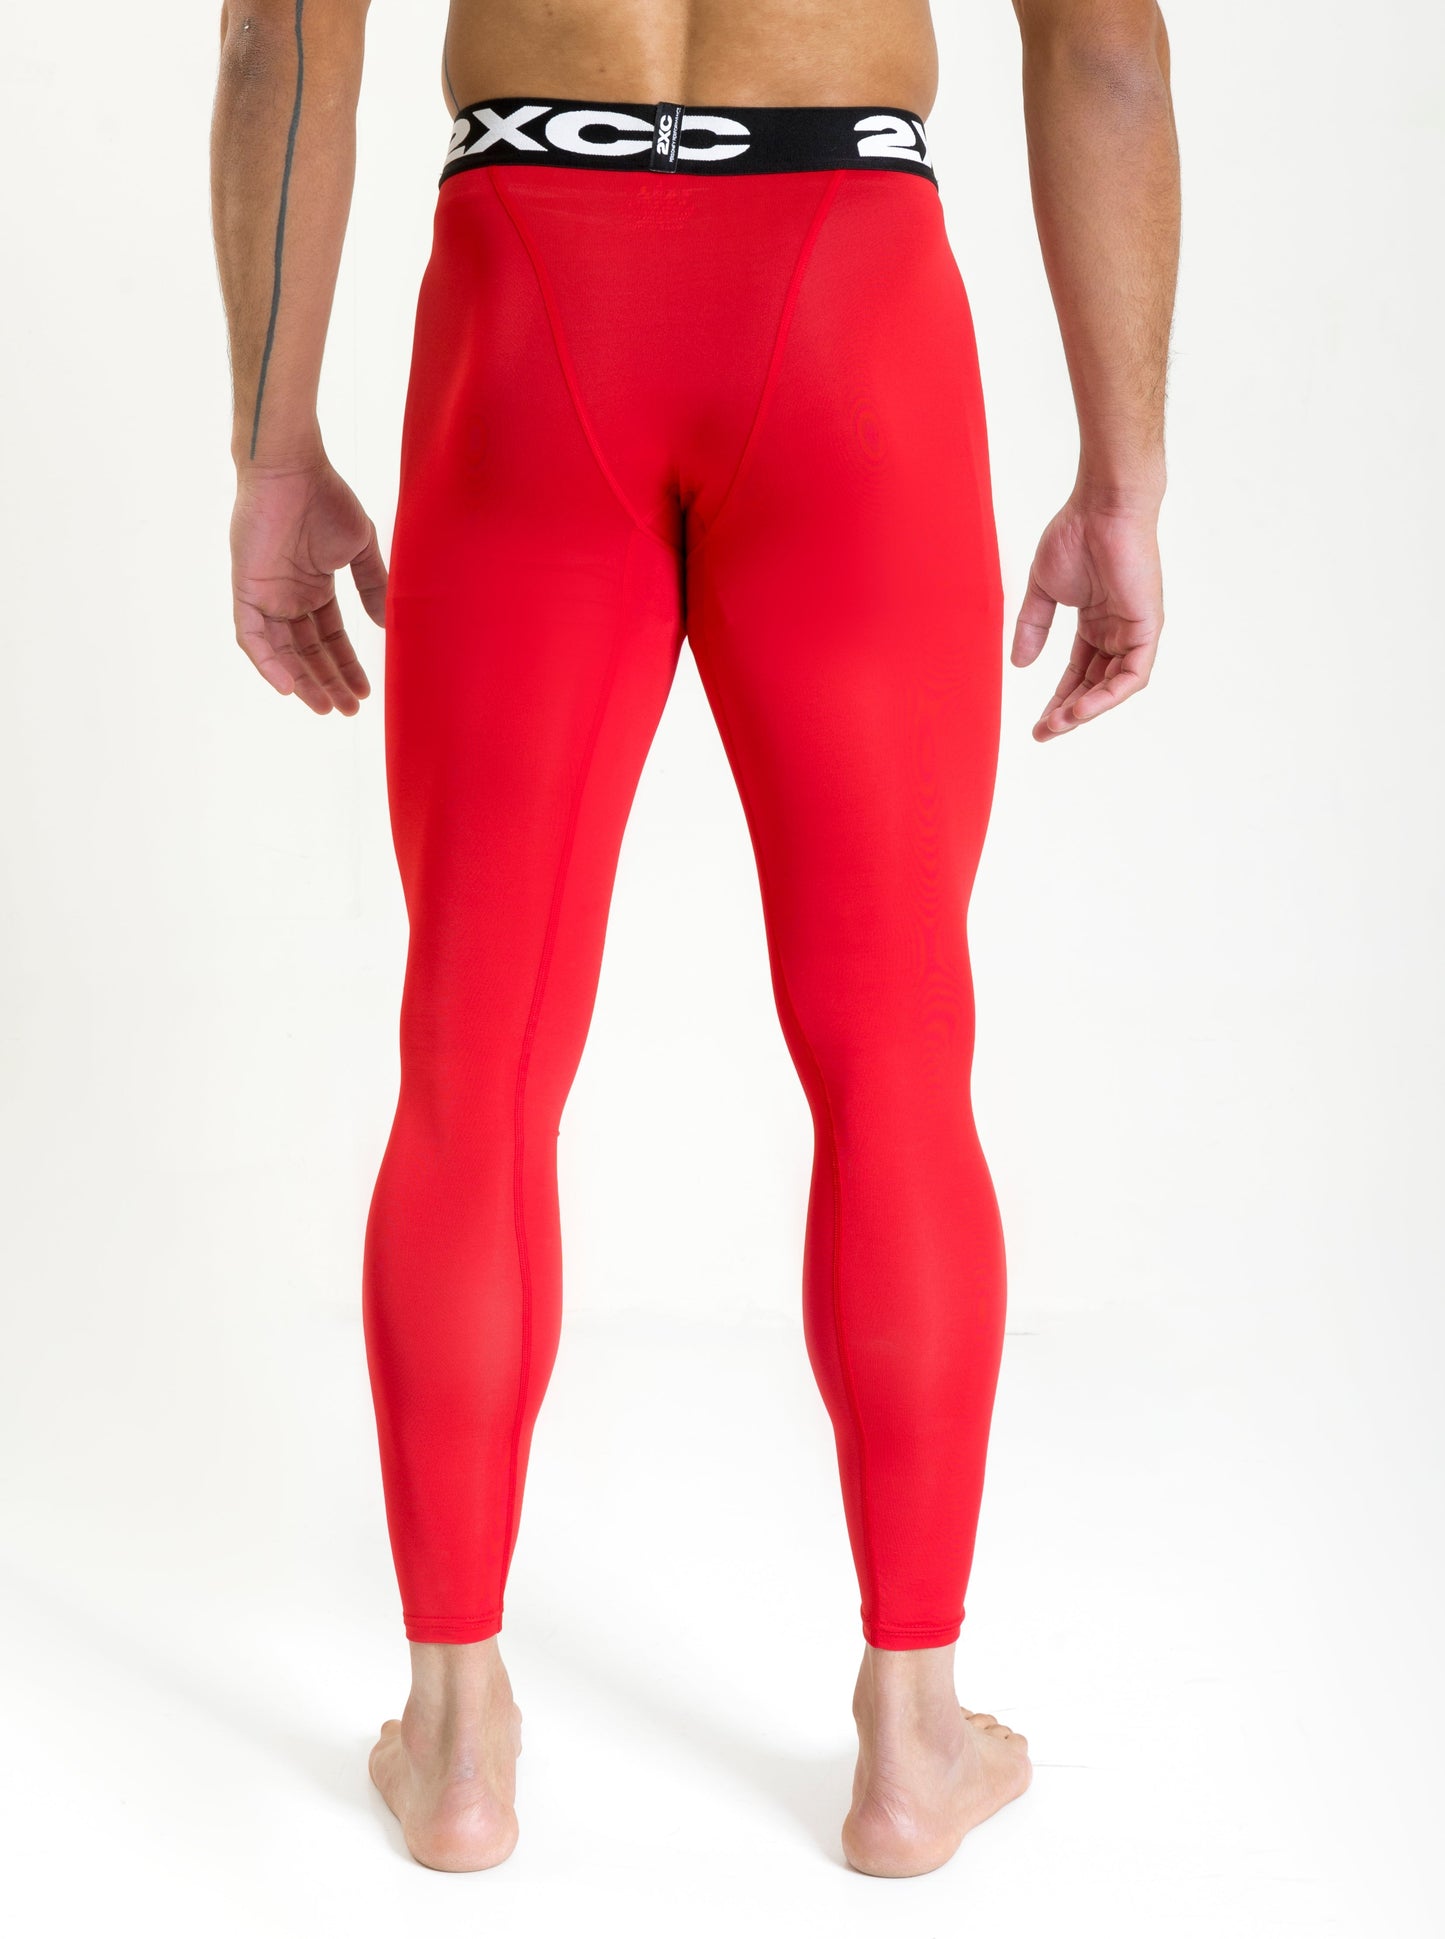 RED FULL BOTTOM COMPRESSION TIGHTS/ SKINS